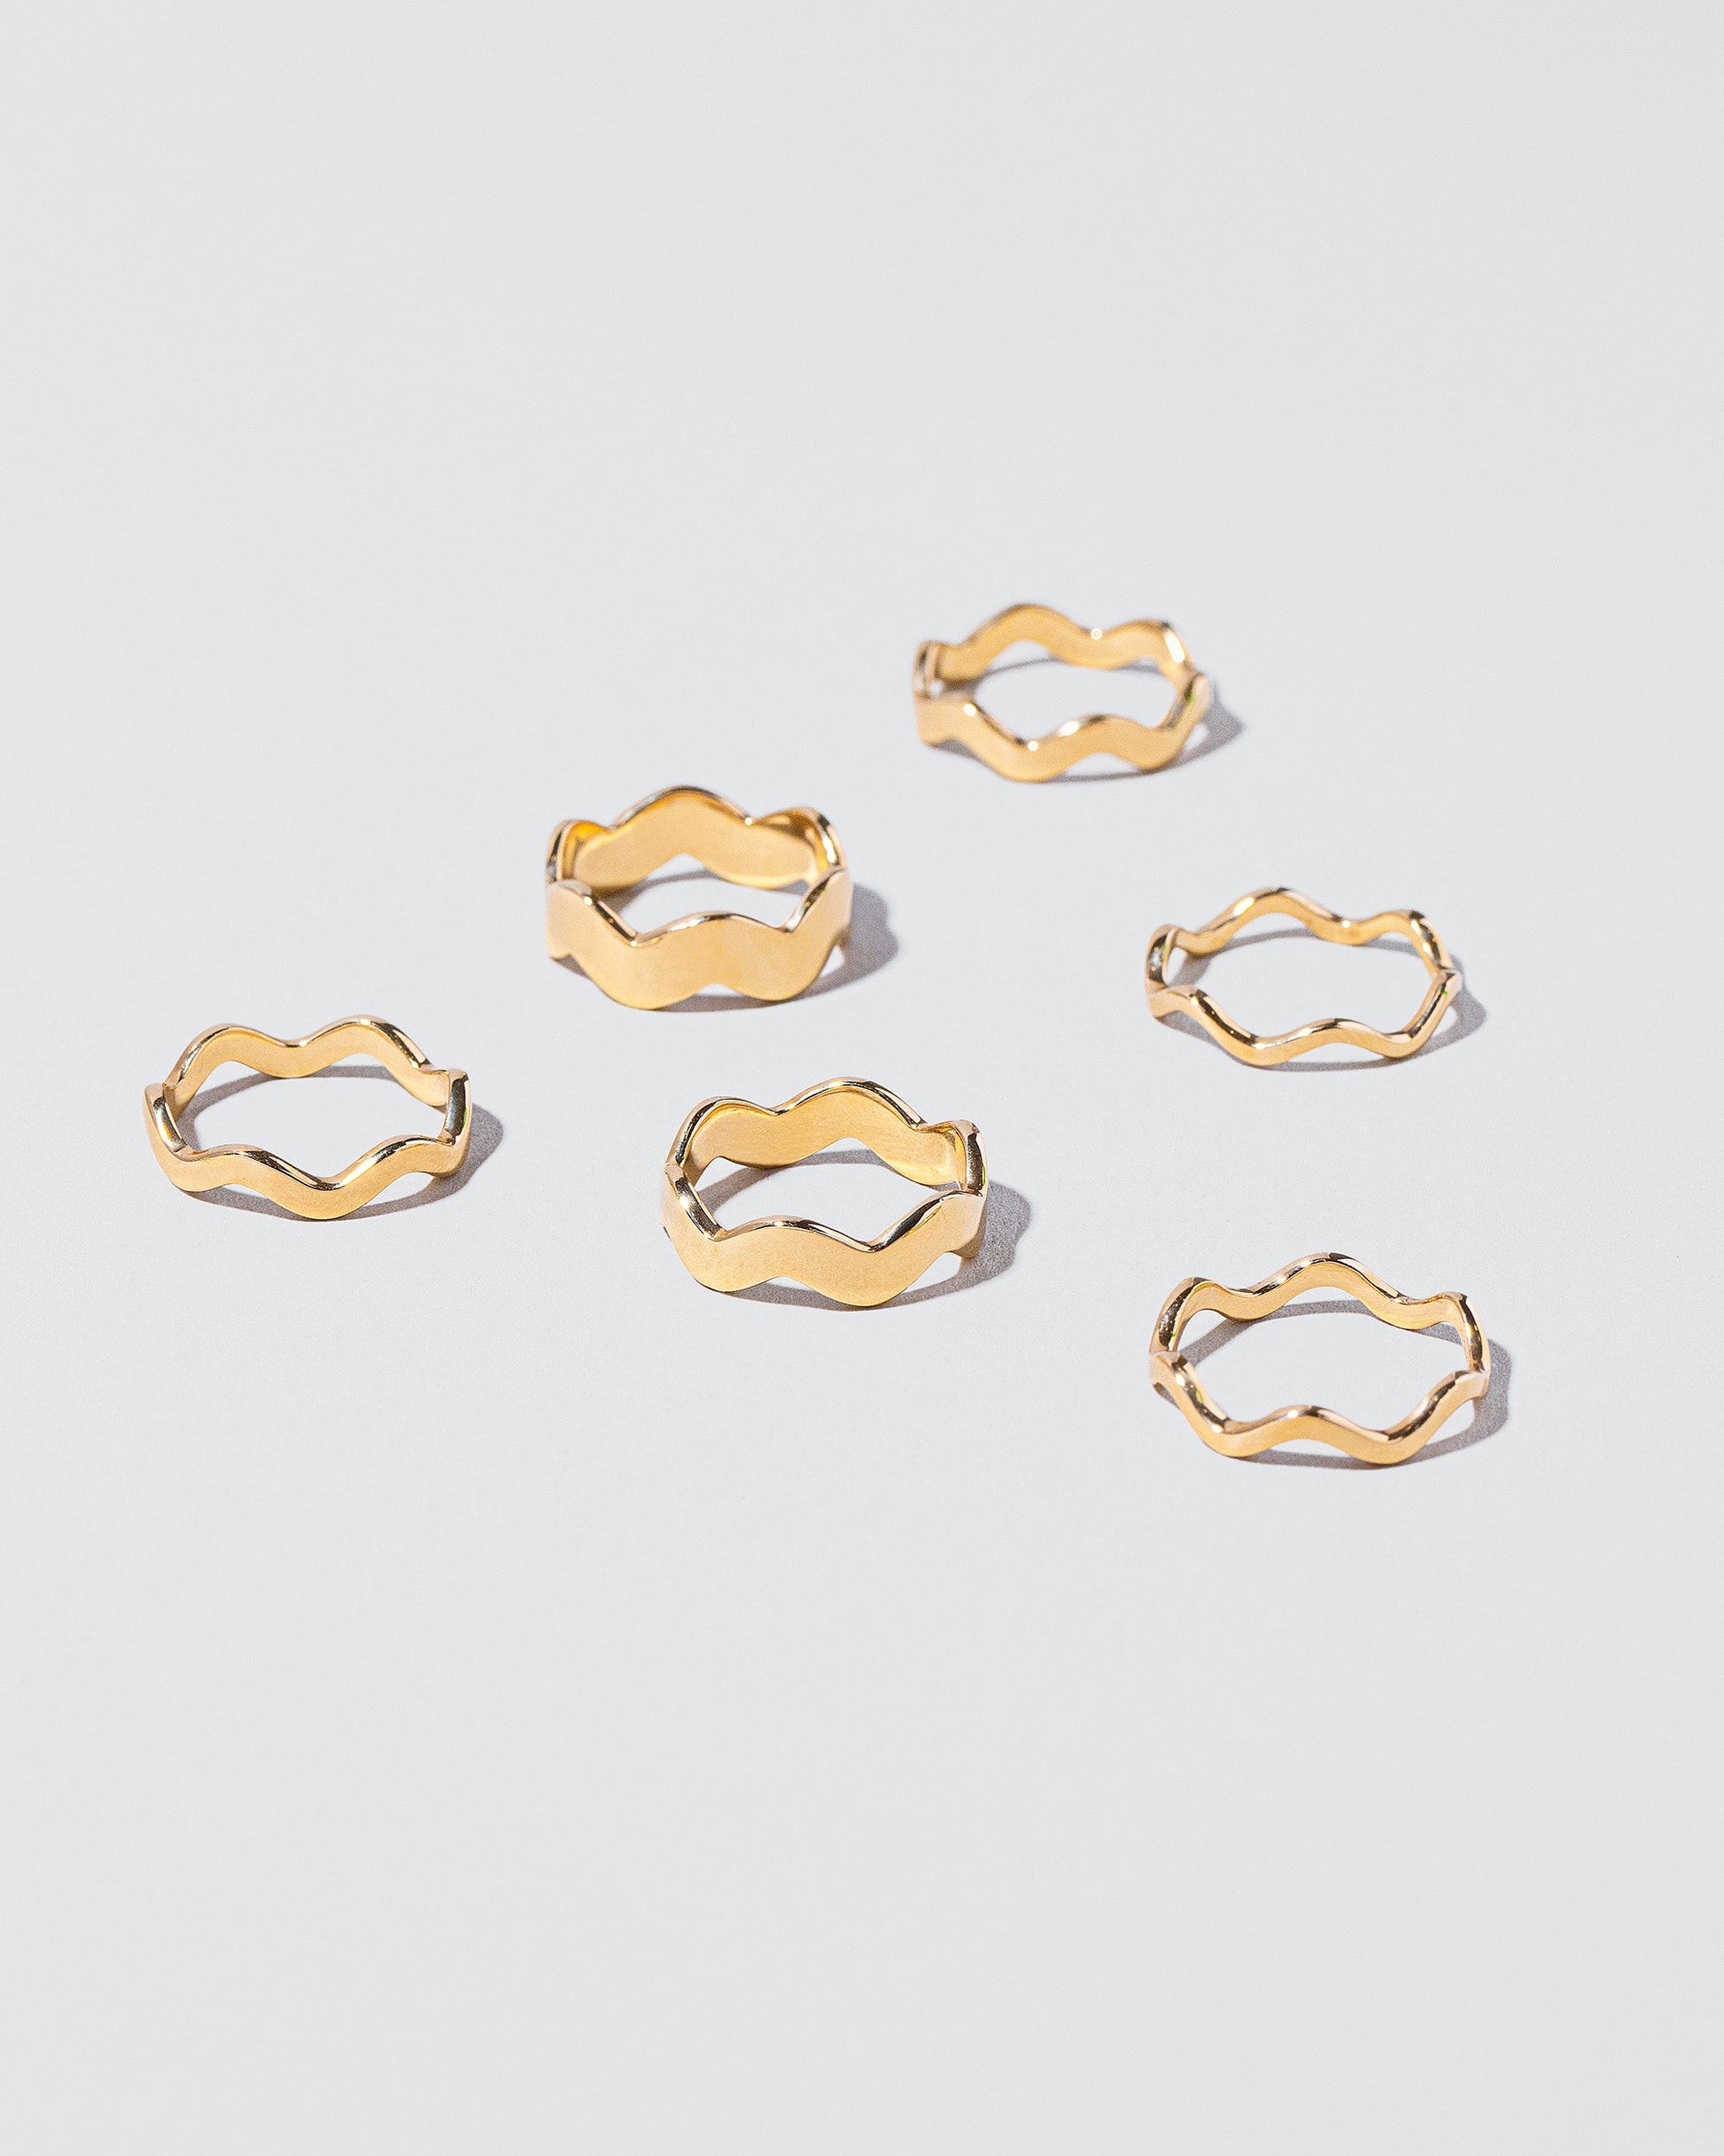 Group of Ripple Bands on light colored background.